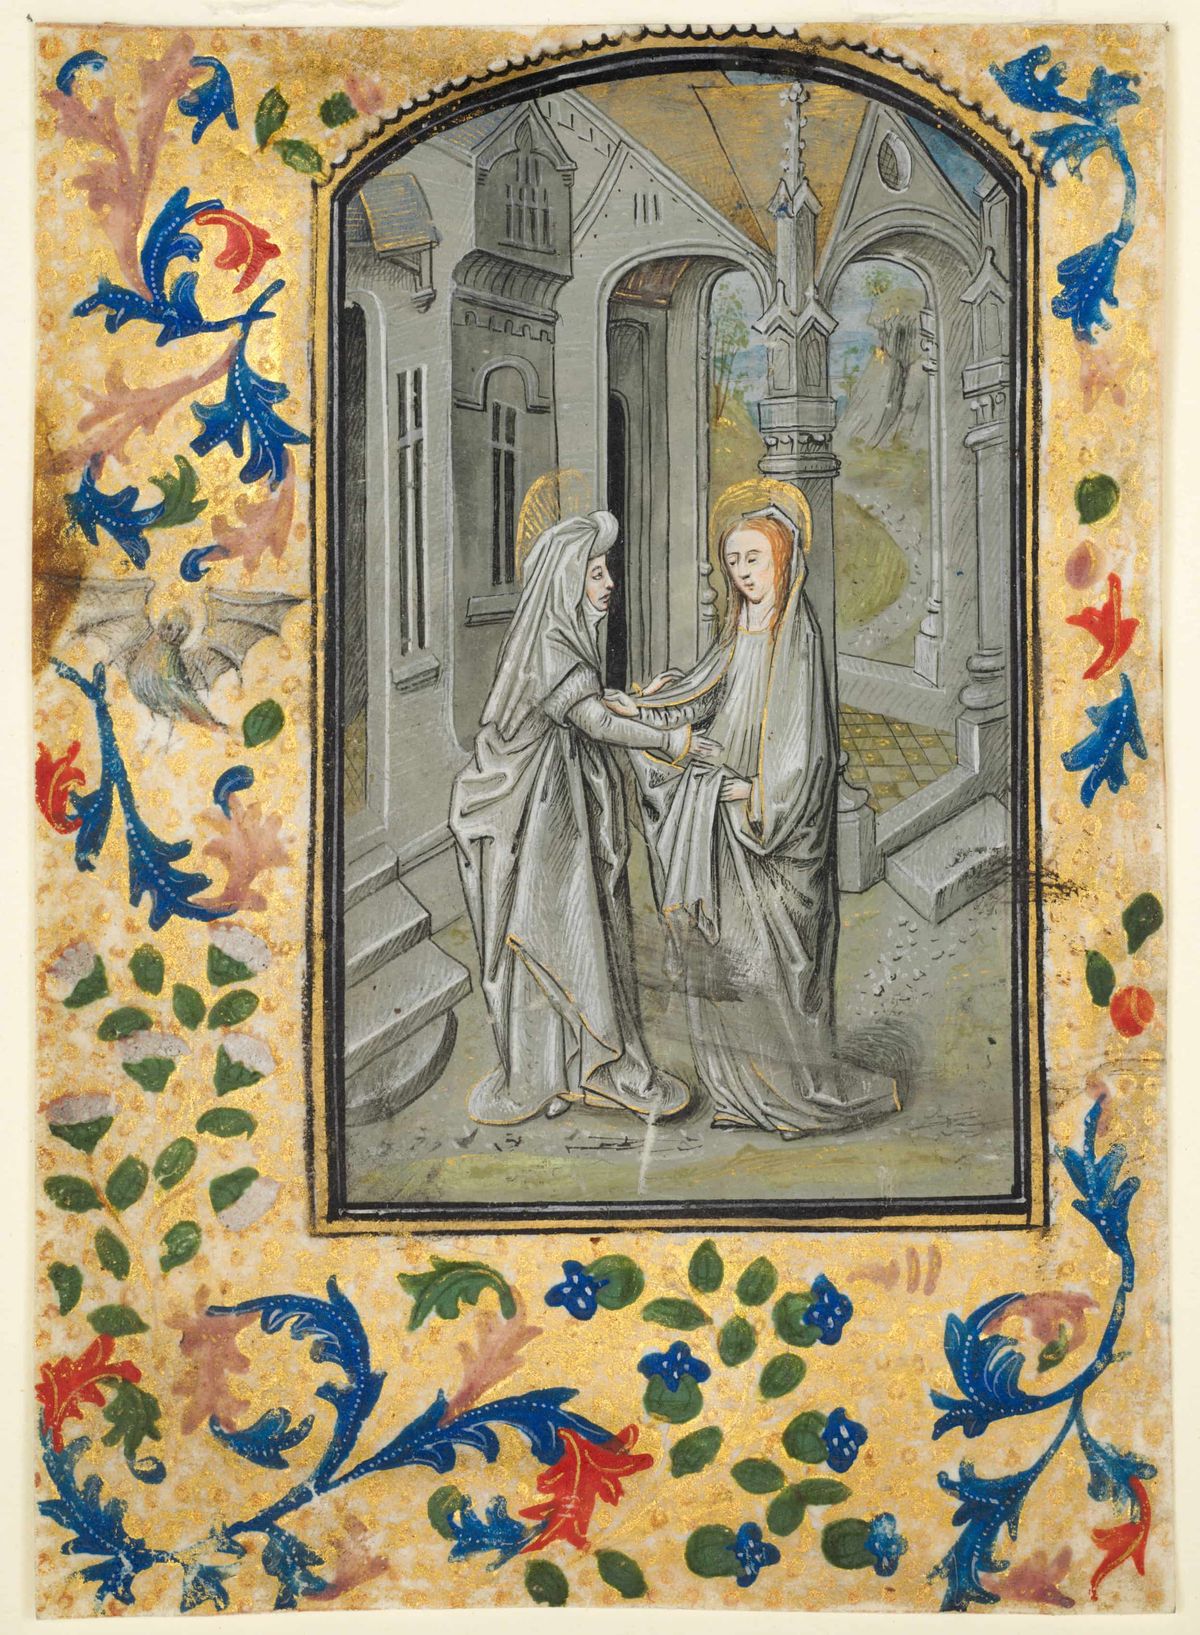 Leaf from a Book of Hours: The Visitation (1470-1480) by Guillaume Vrelant - Public Domain Bible Painting